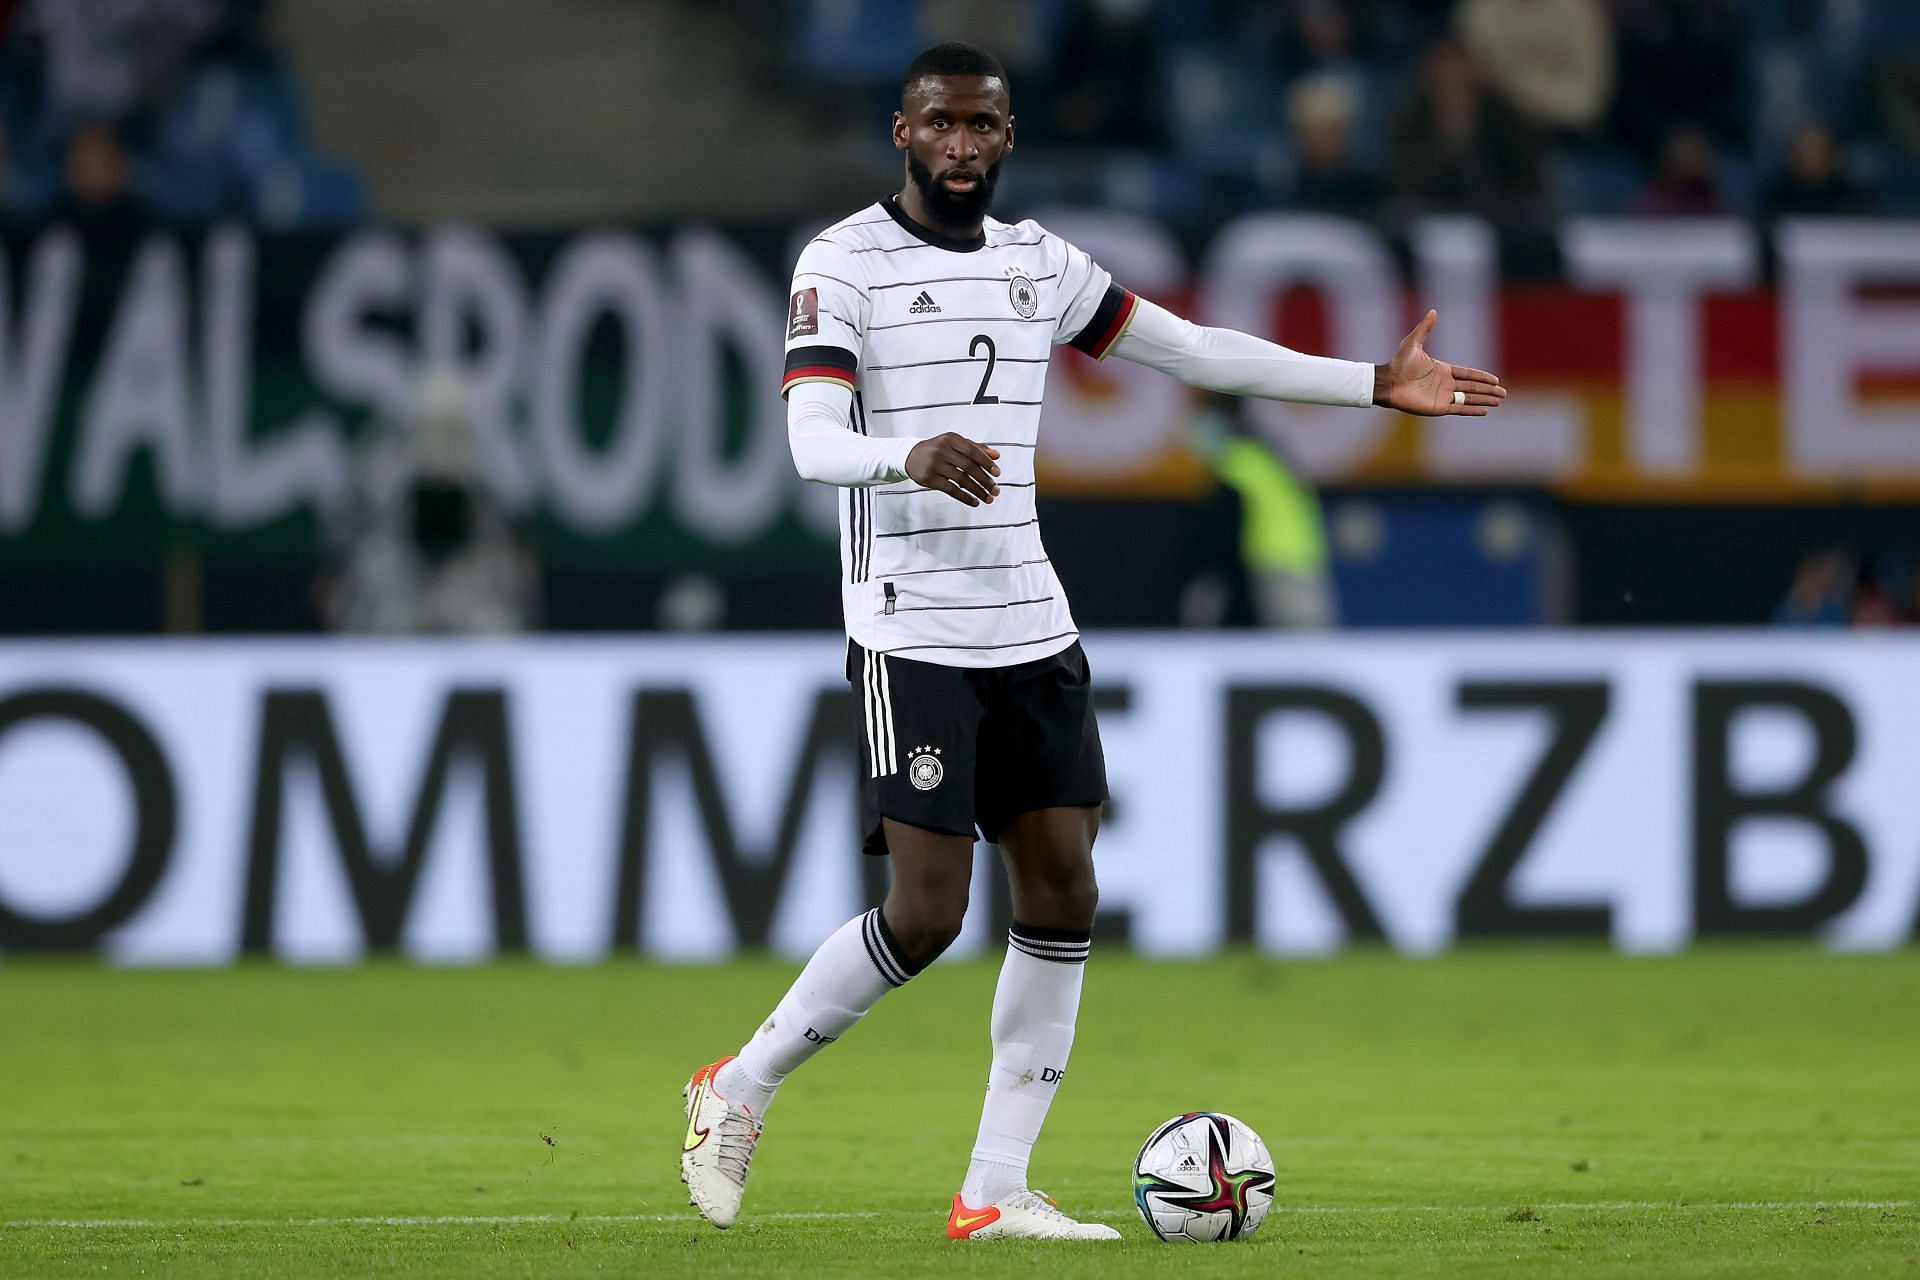 Antonio Rudiger has informed Chelsea he wants to leave the club next year.